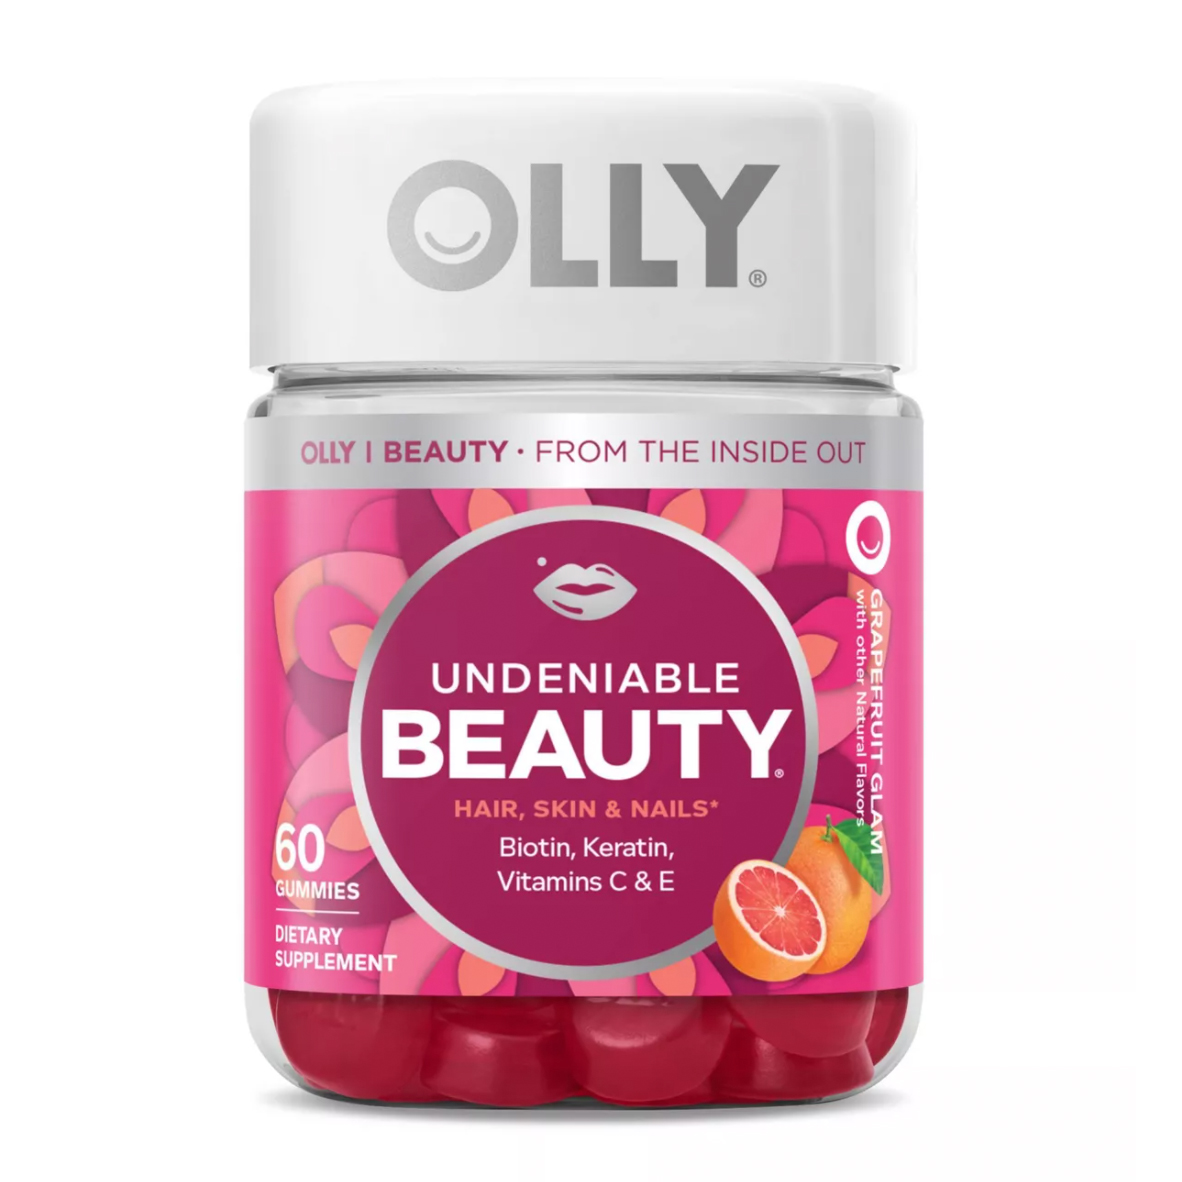 mary phillips skincare routine olly vitamins